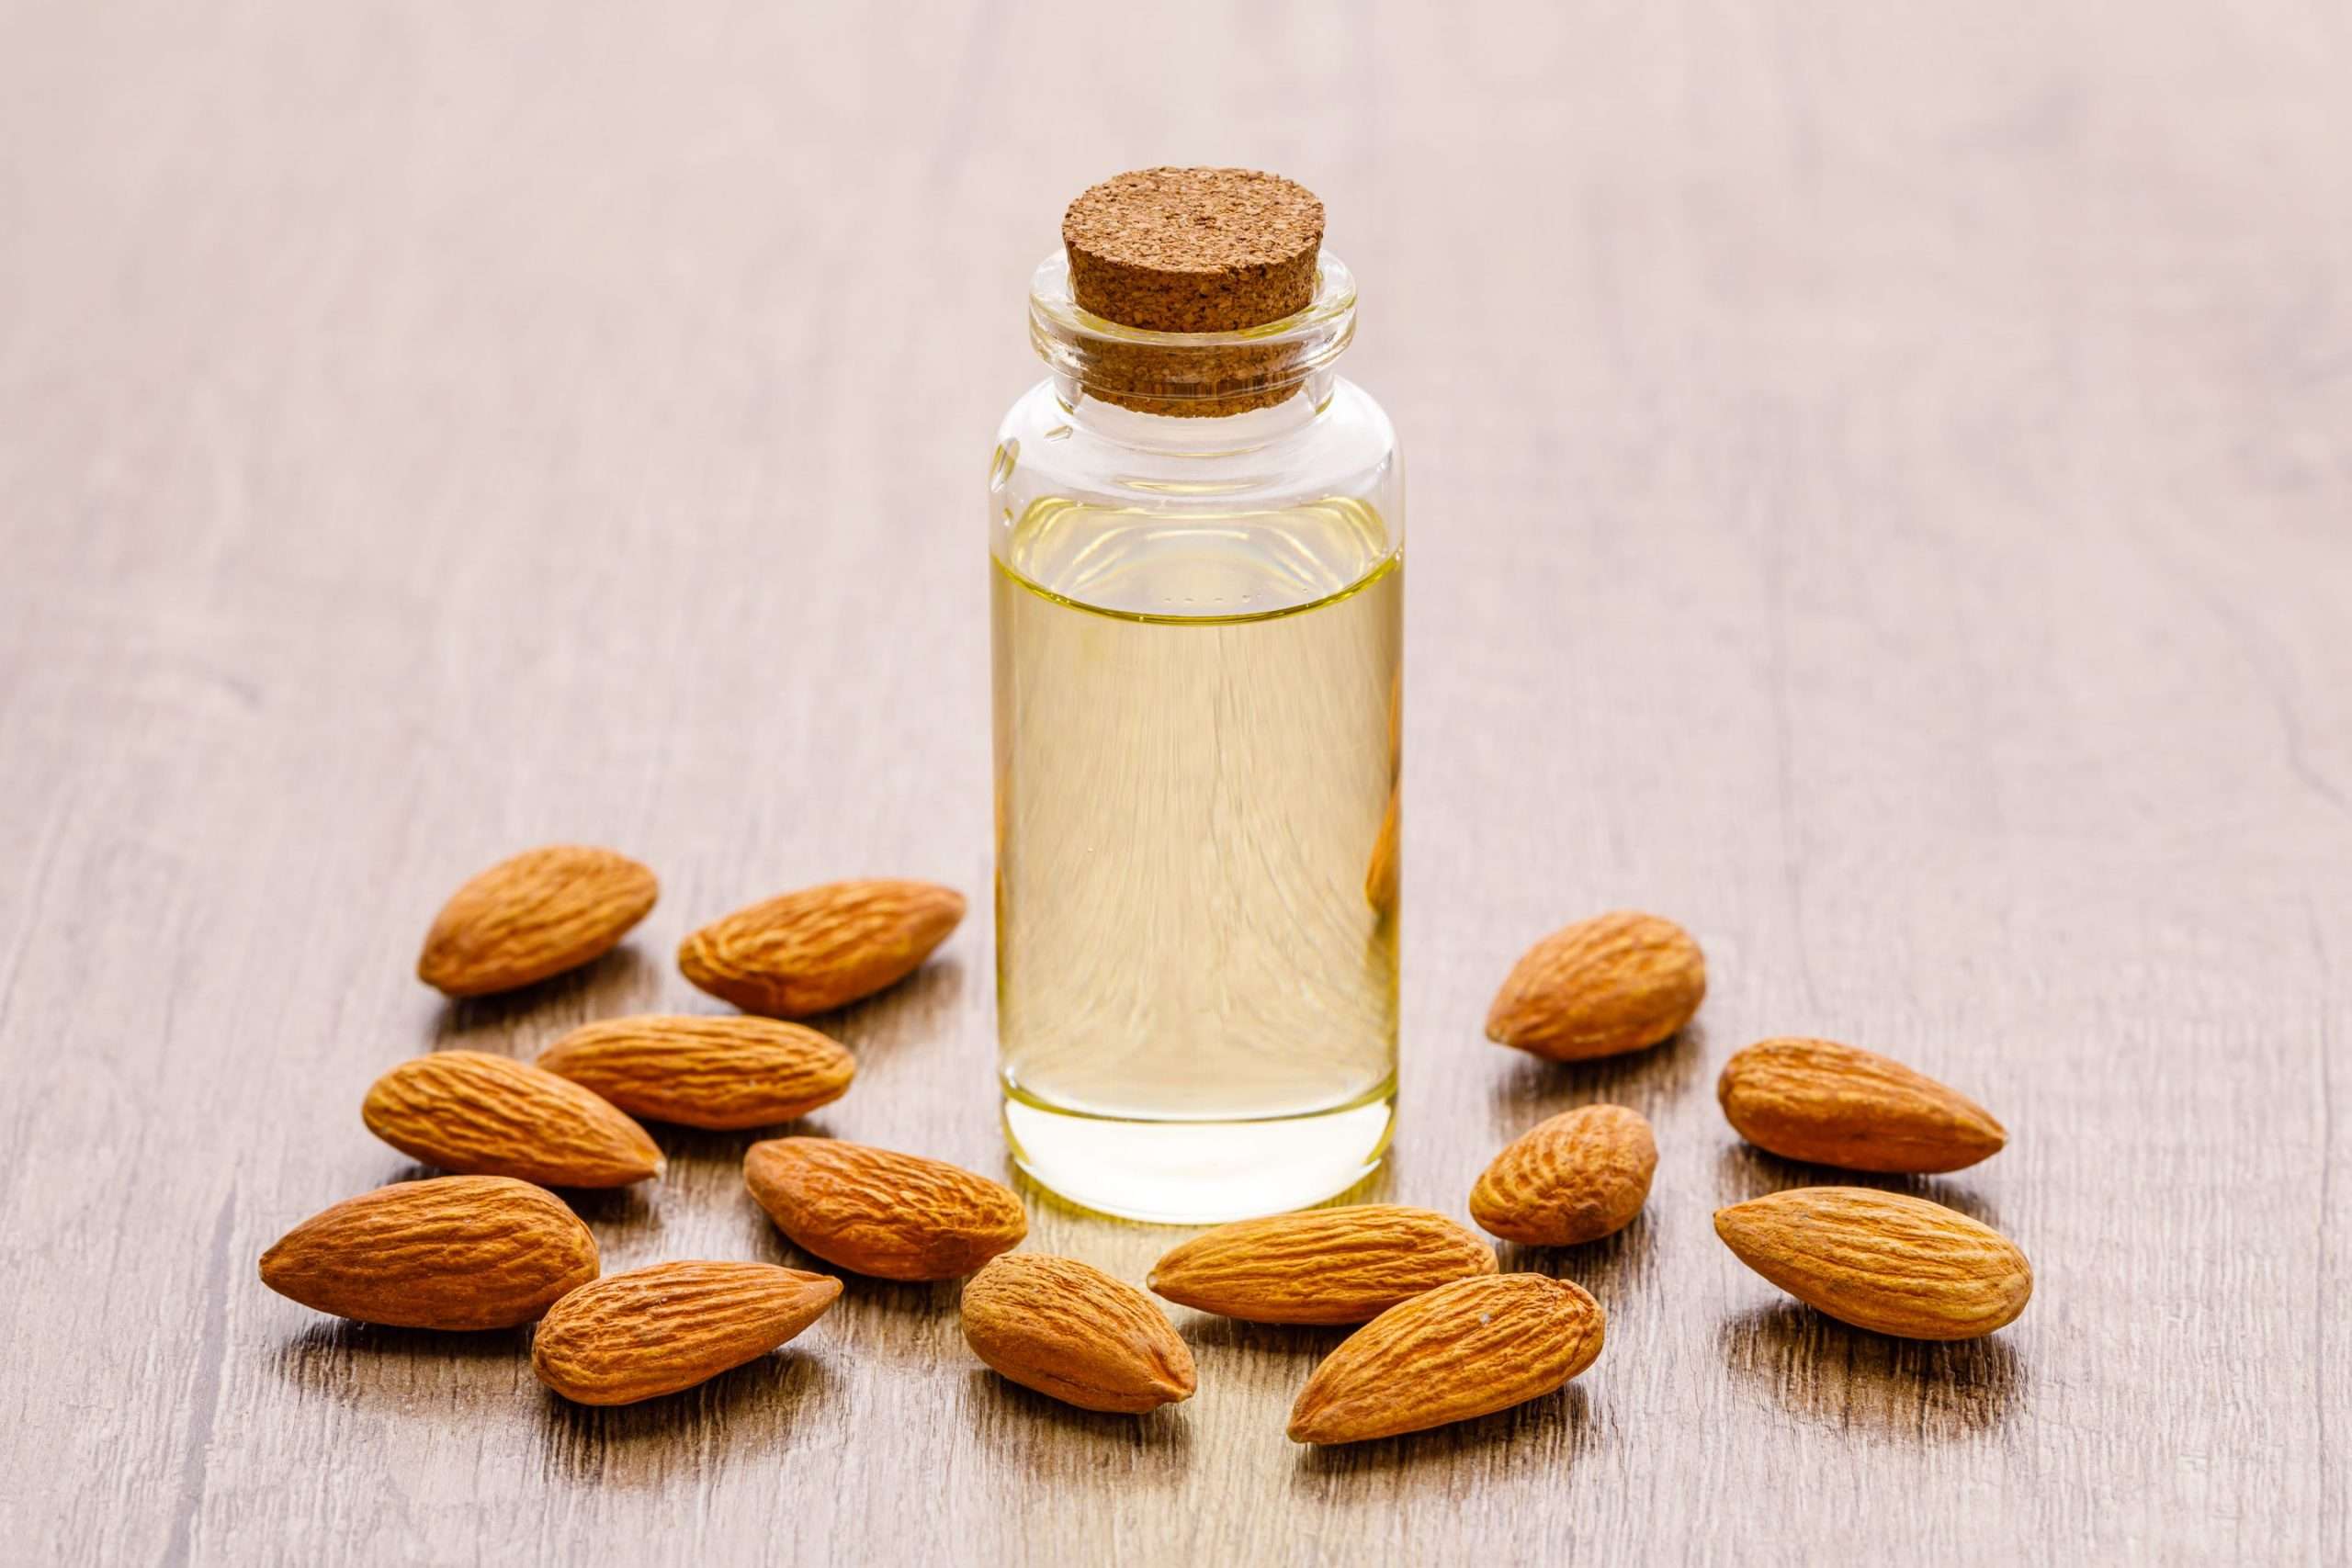 Is Almond Extract Safe If You Have Nut Allergies?